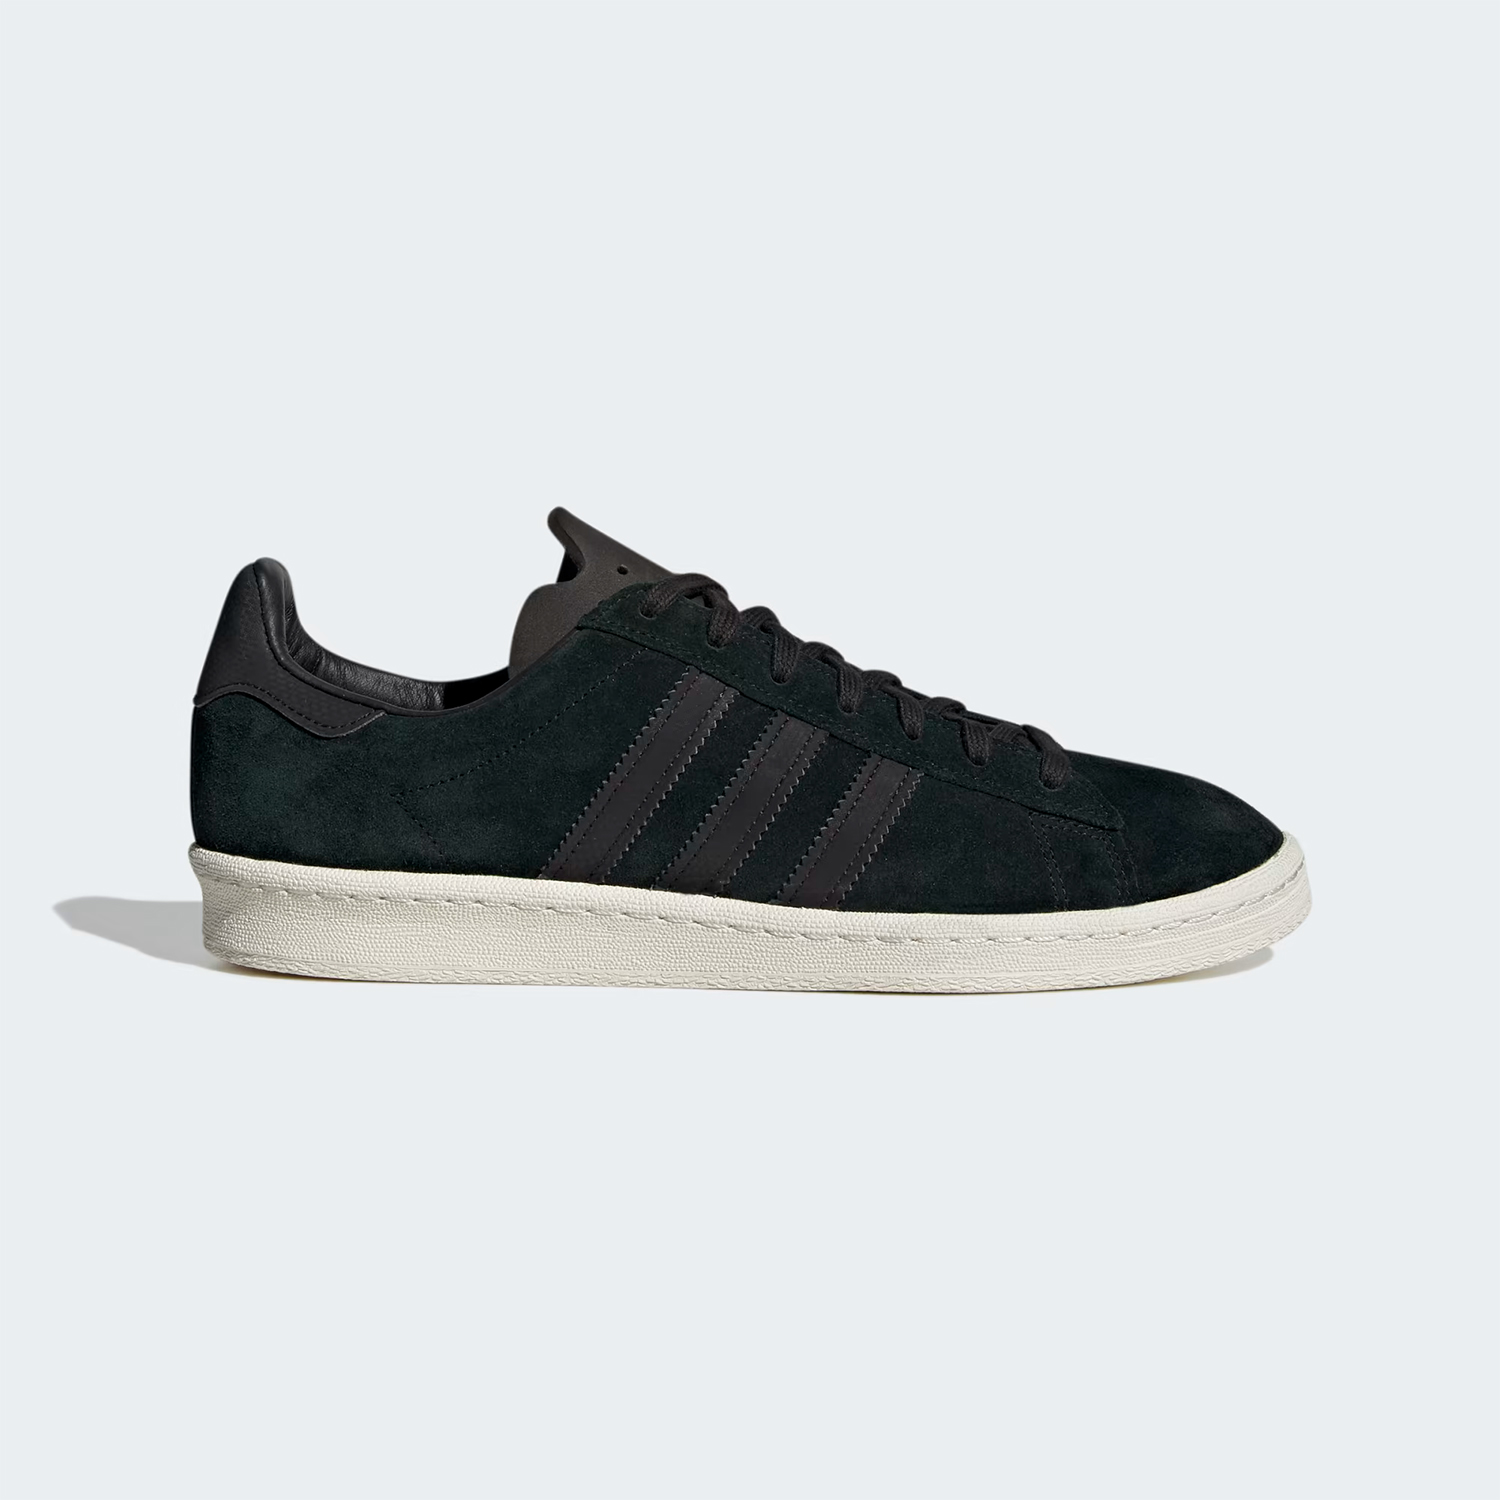 Norse Projects x adidas Campus | sneakerb0b RELEASES